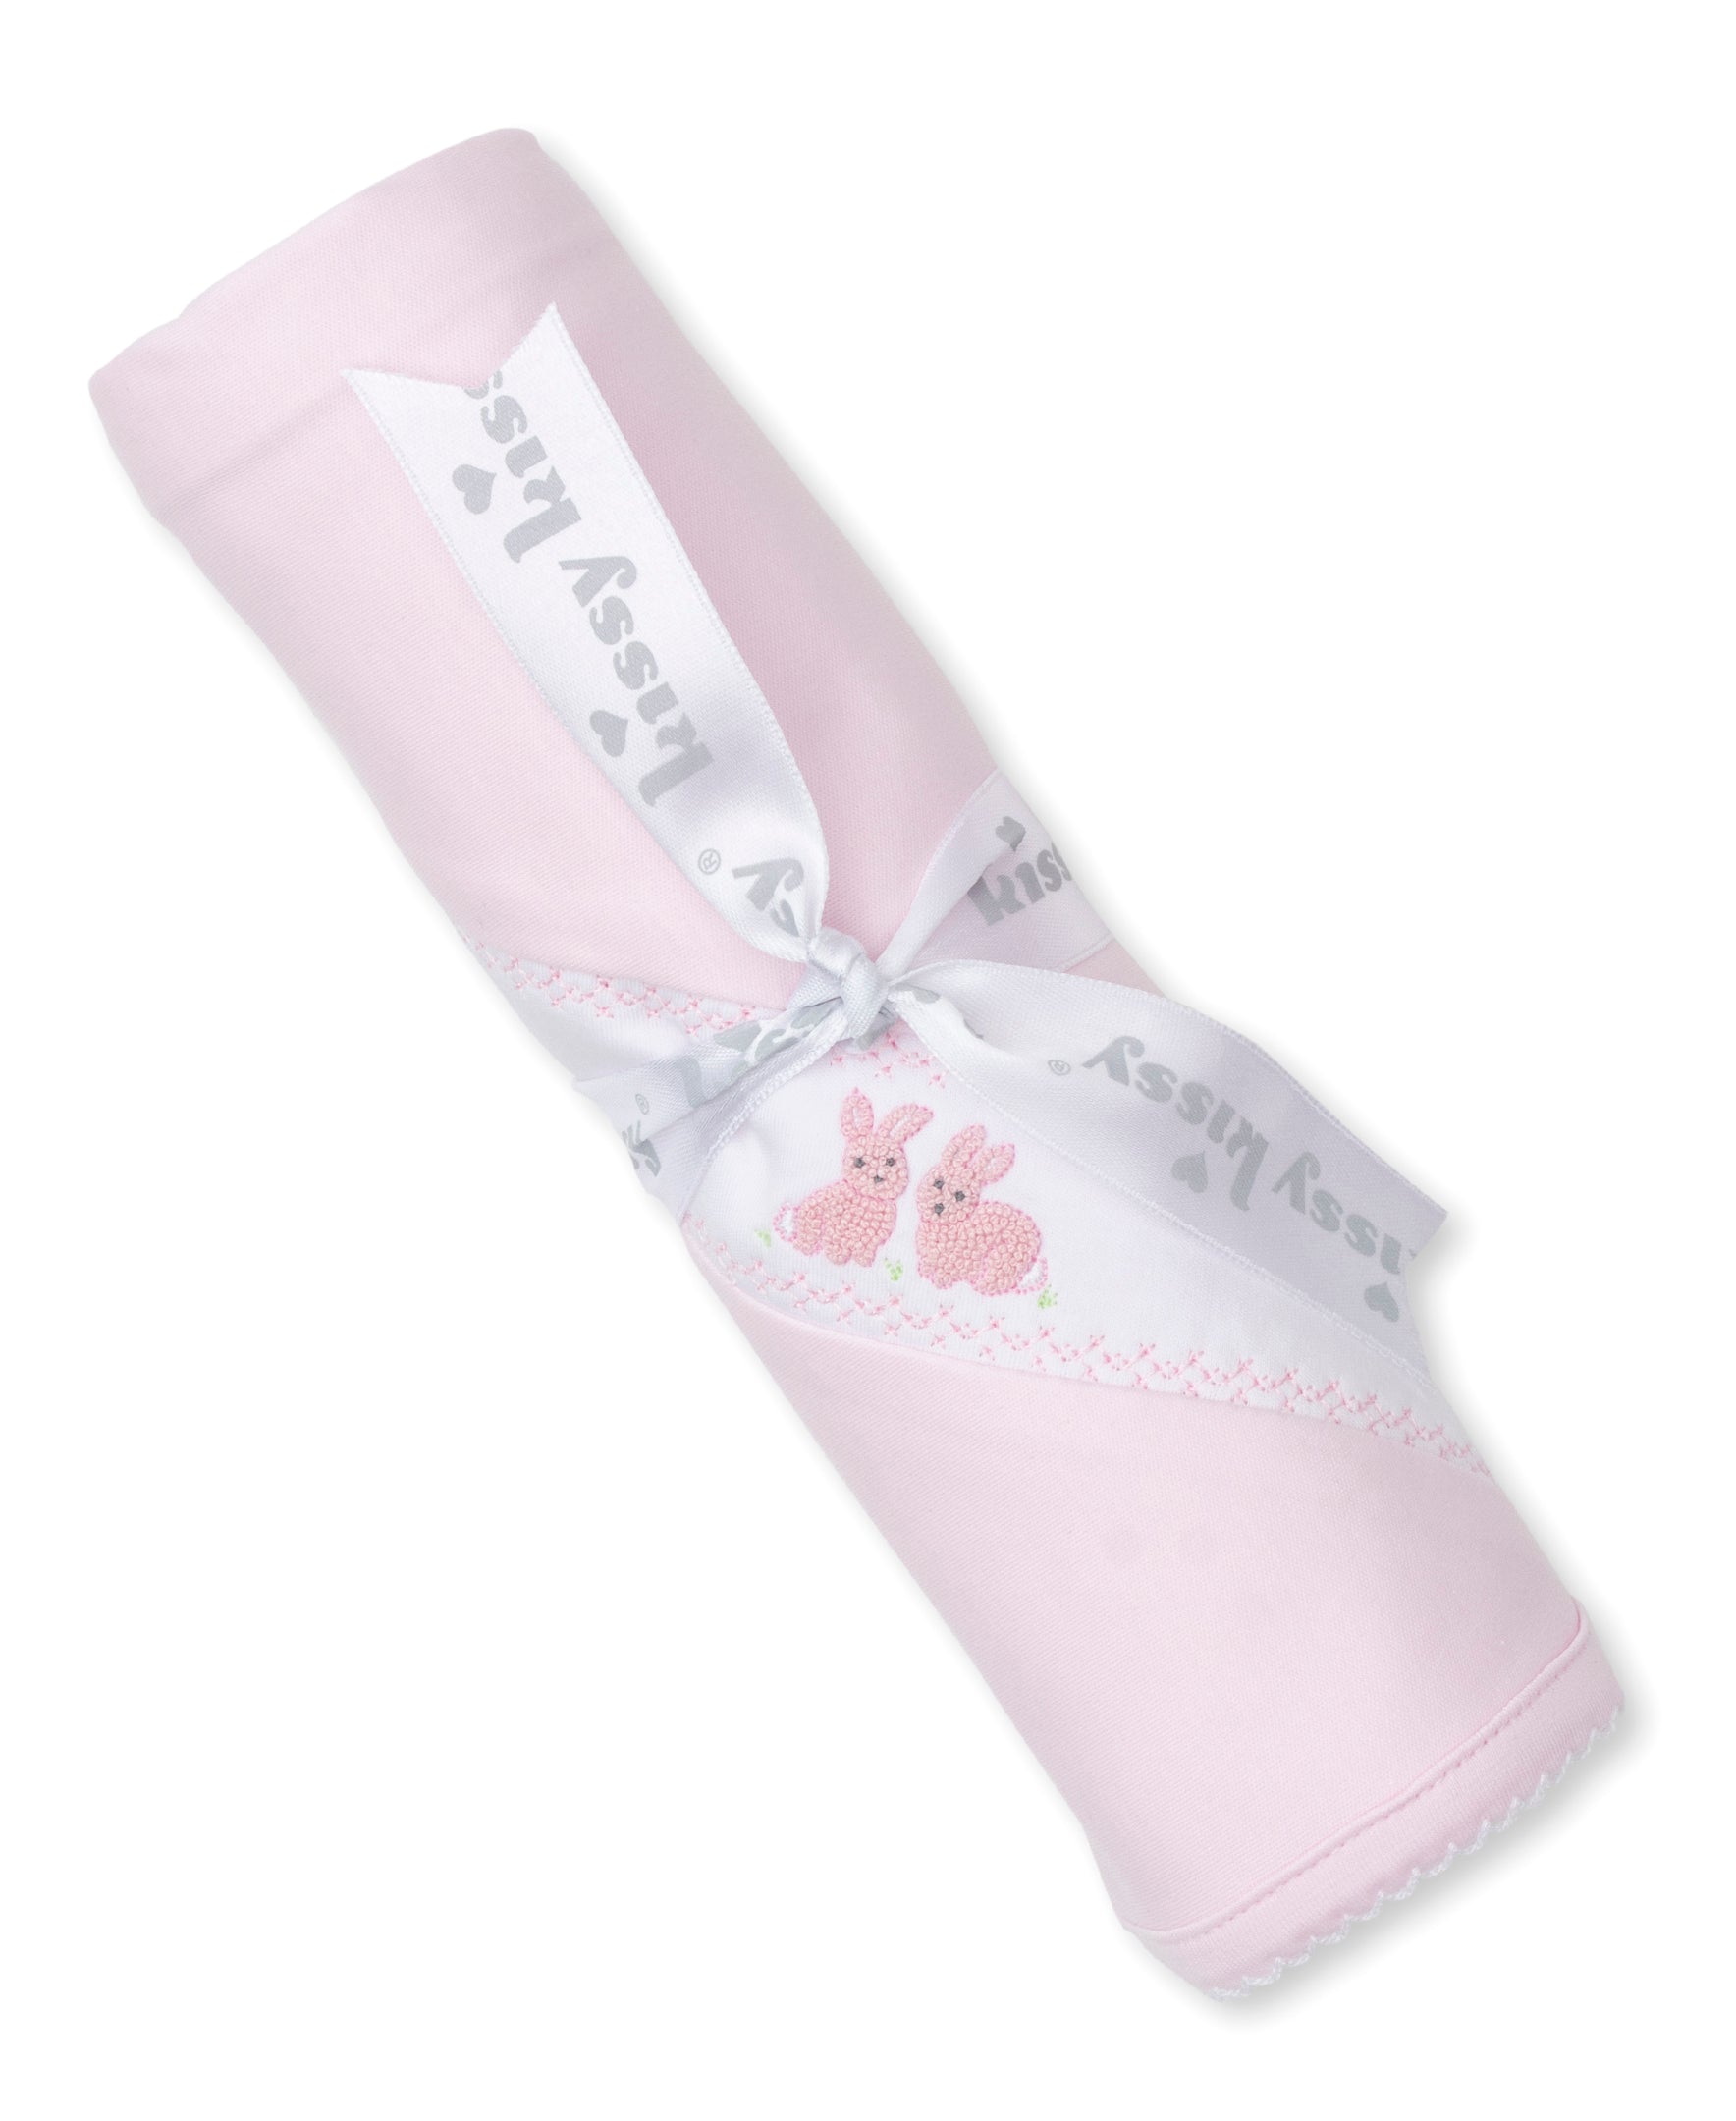 Premier Cottontail Hollows Pink Hand Emb. Blanket - Kissy Kissy